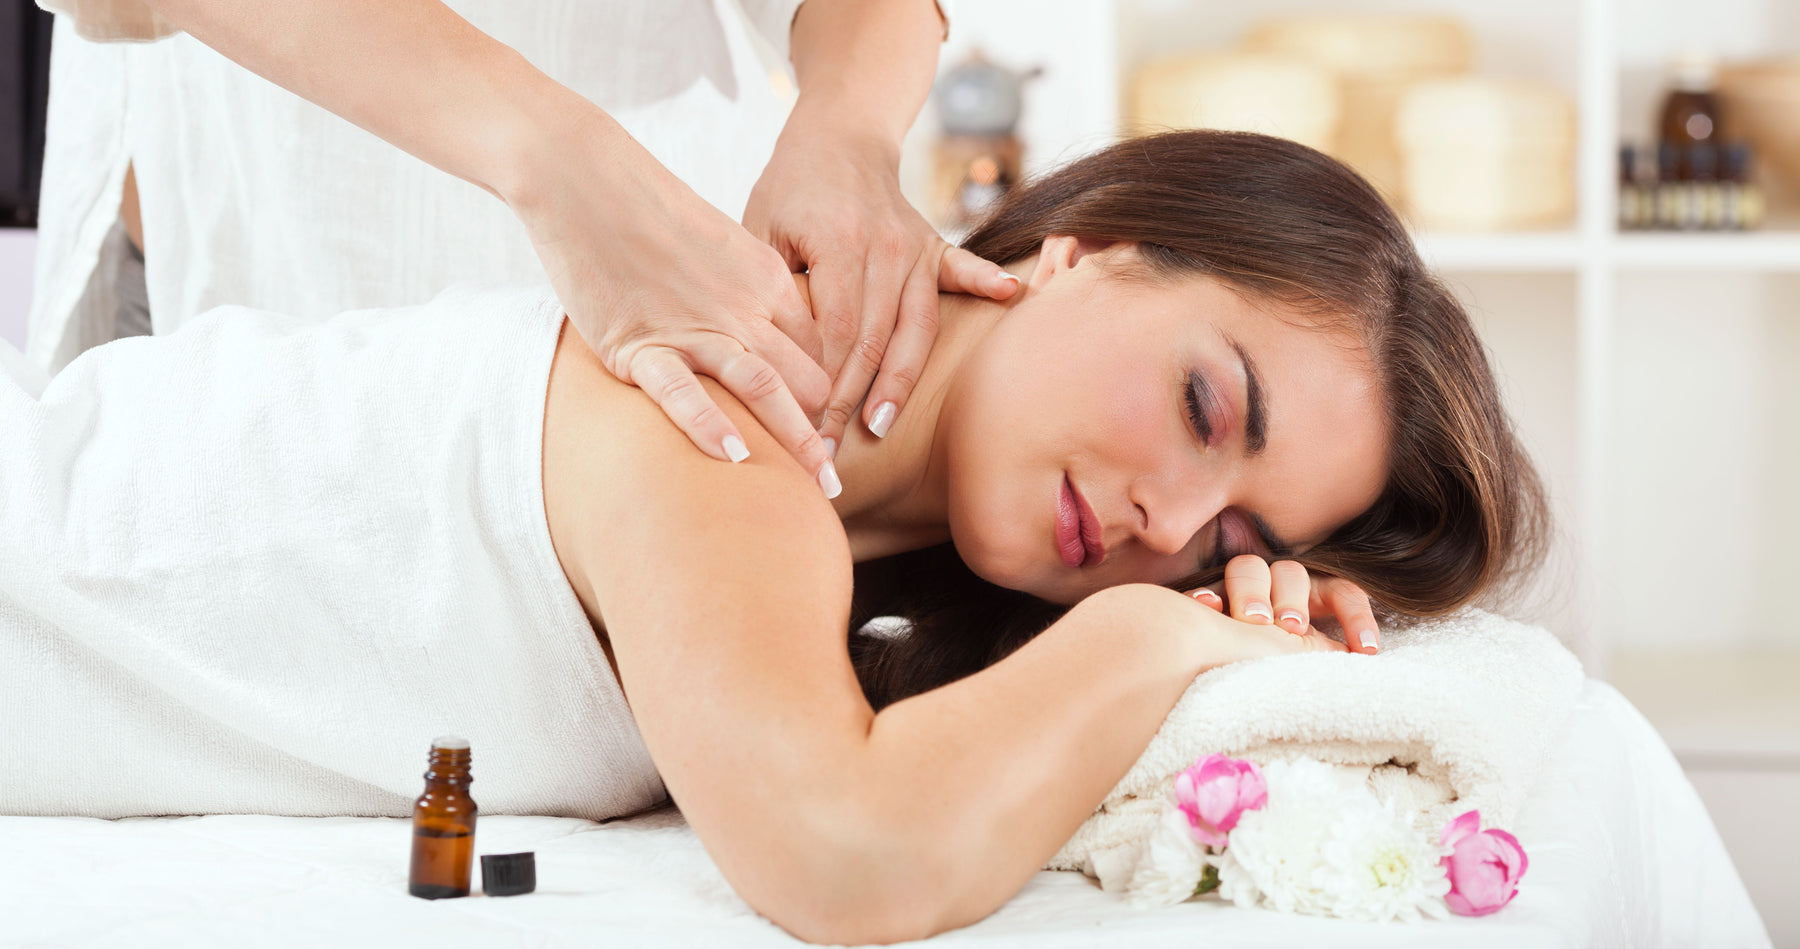 woman being massaged with essential oil bottle next to her